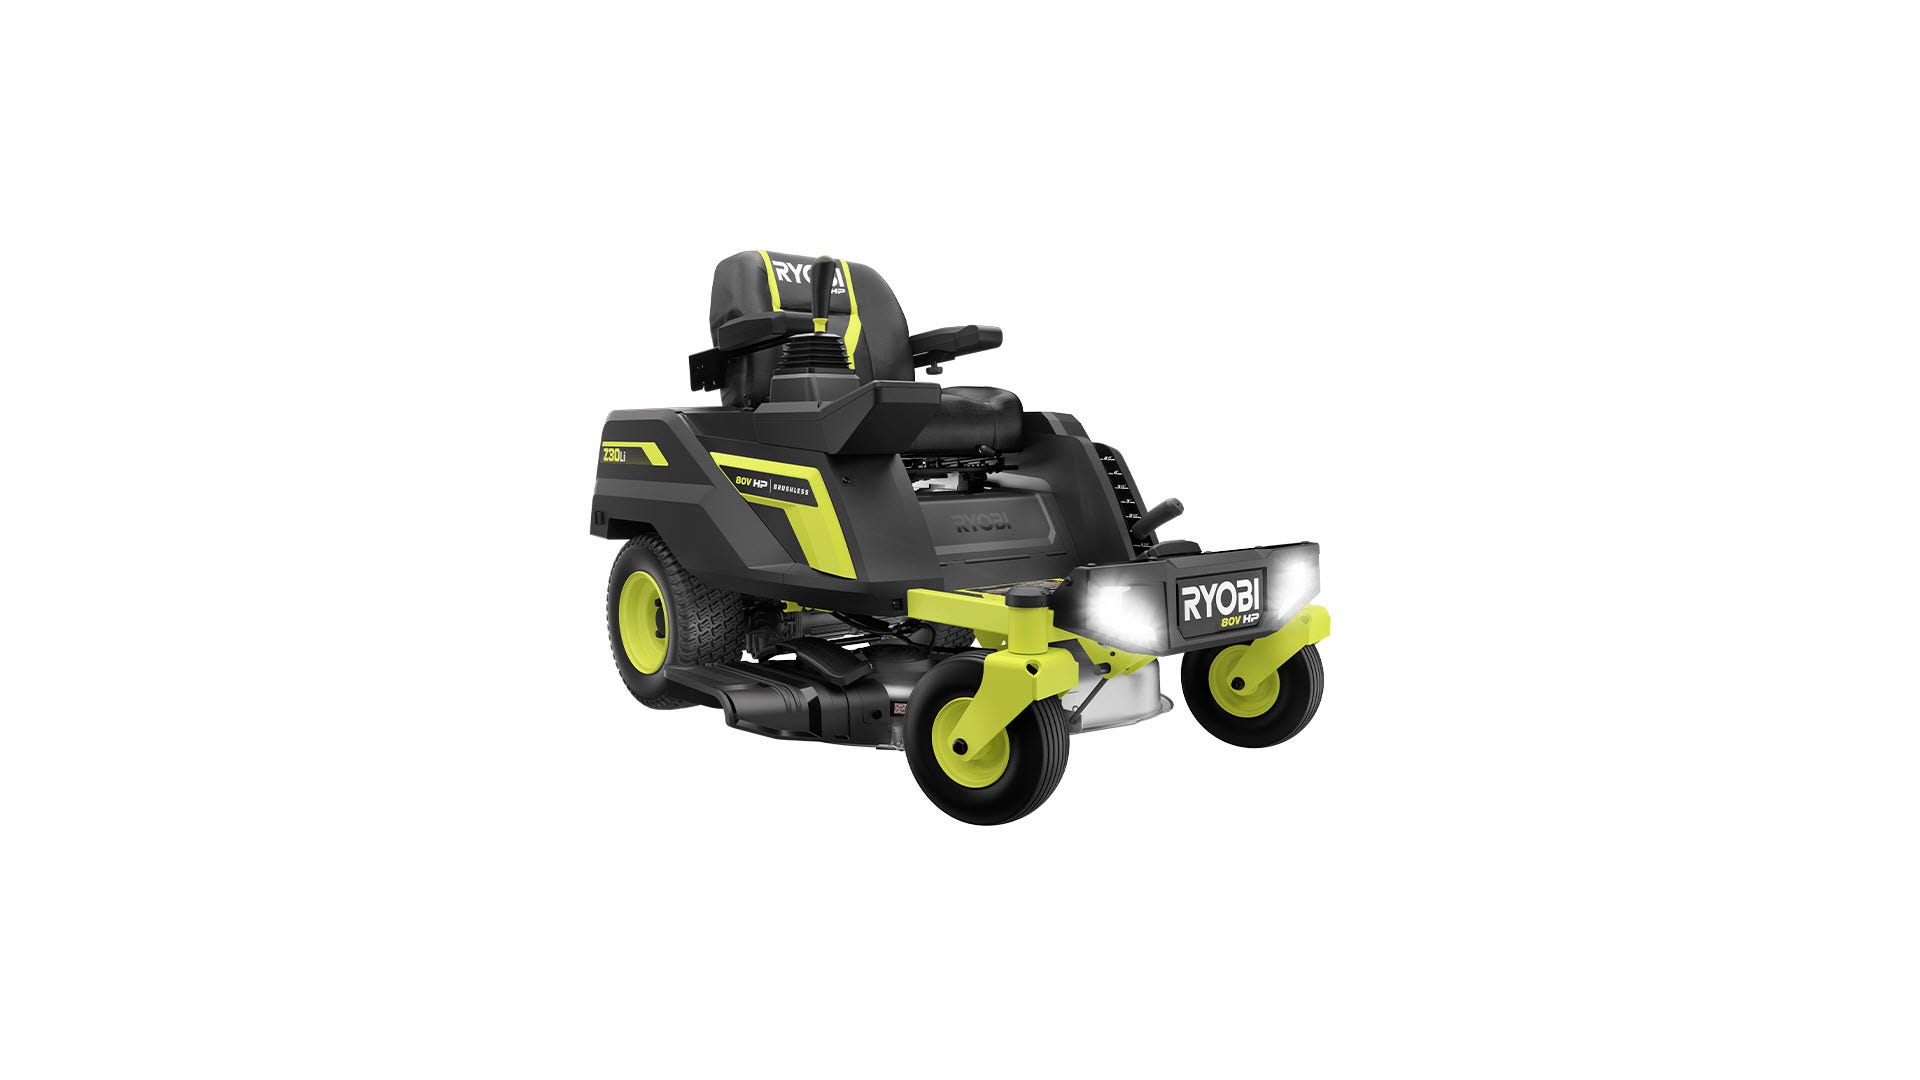 A li-ion battery powered electric lawn mower